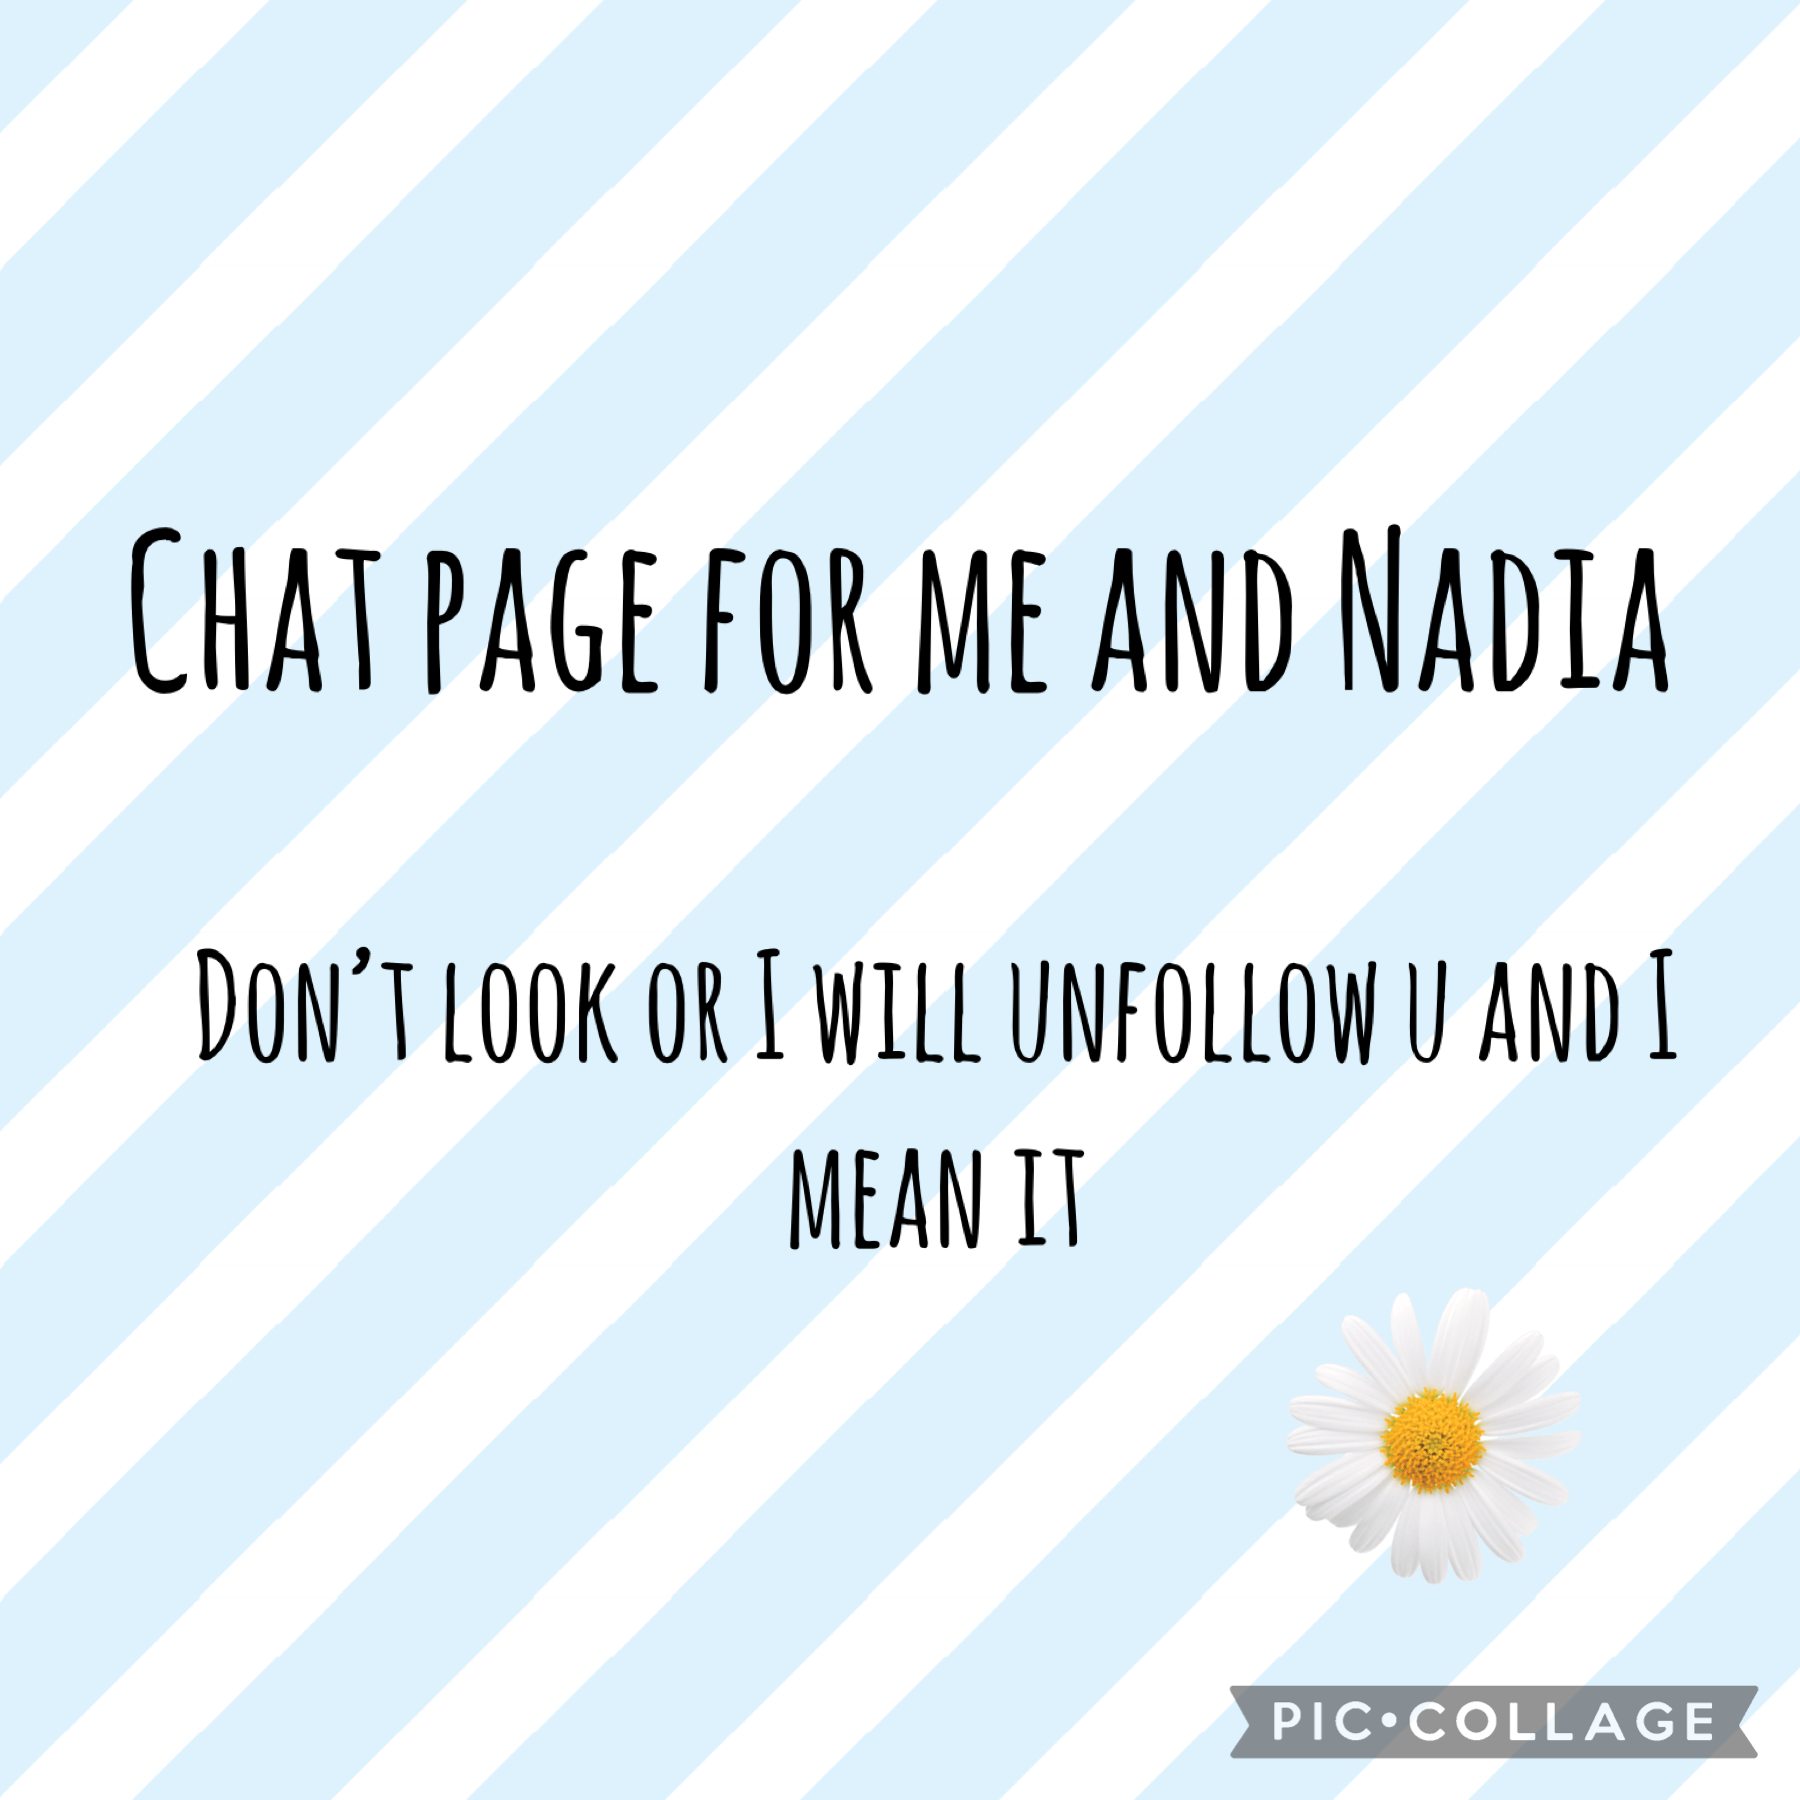 DO NOT LOOK AT THIS CHATPAGE 